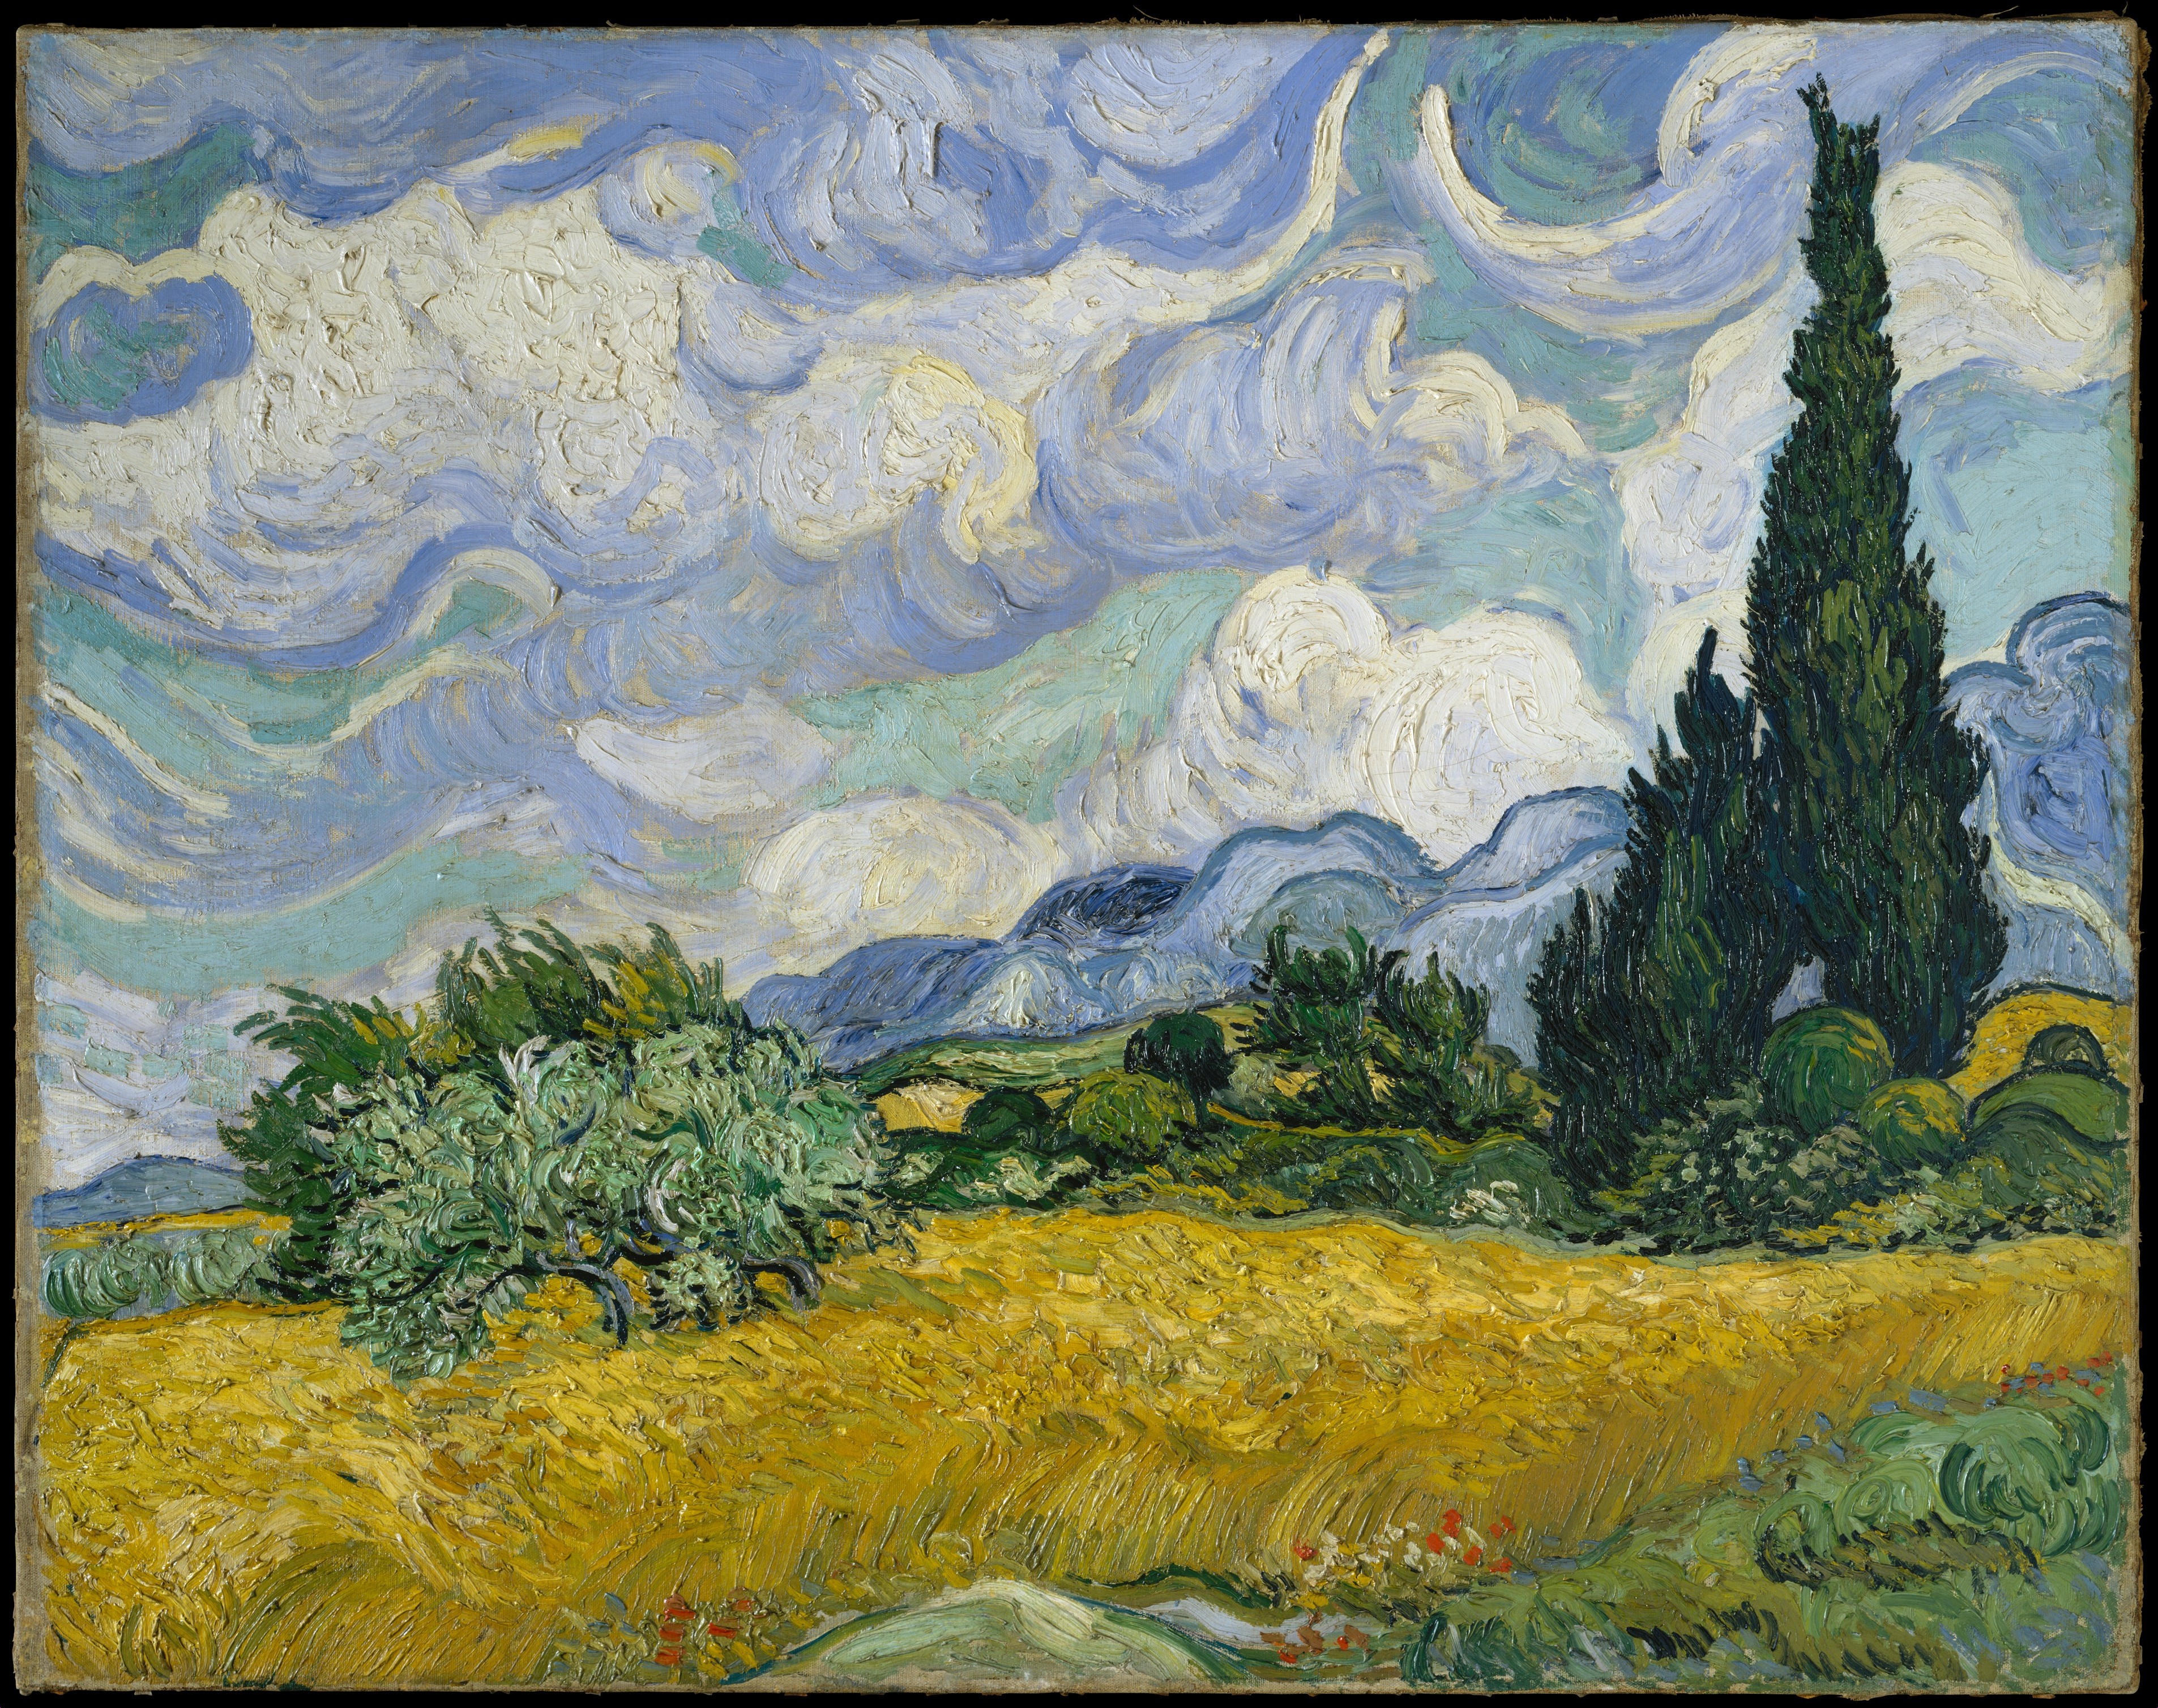 Vincent van Gogh | Wheat Field with Cypresses | The Met